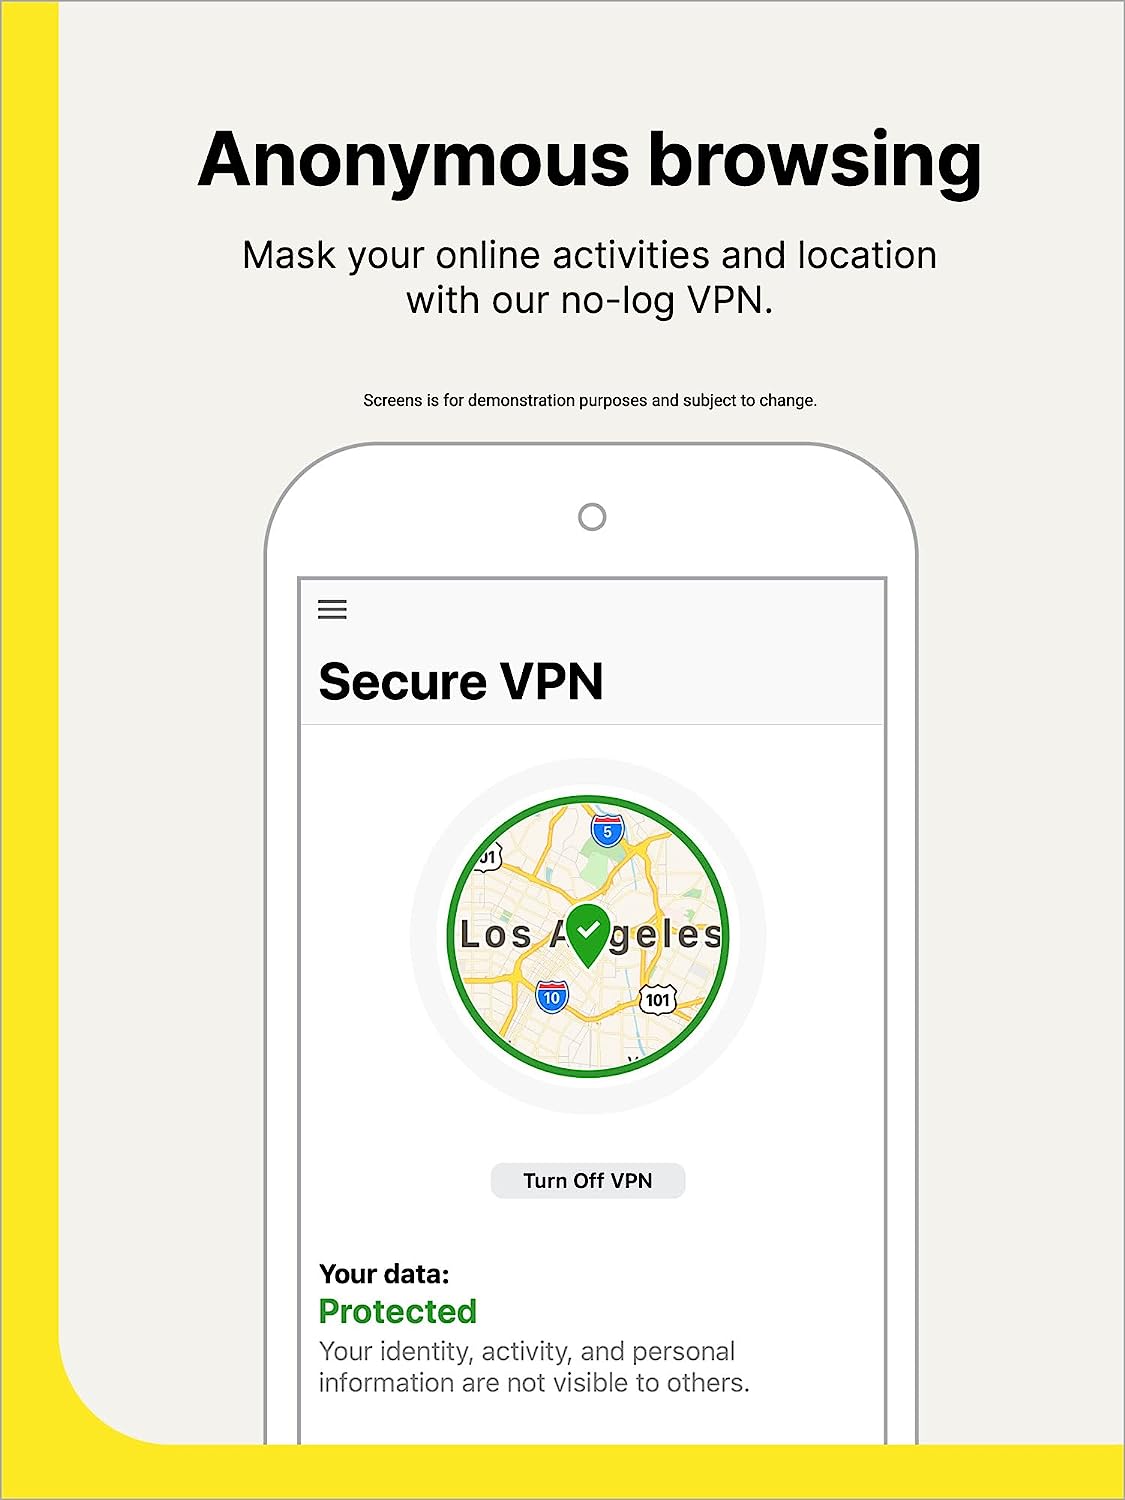 Norton AntiVirus Plus 2023 , Antivirus software for 1 Device with Auto-Renewal – Includes Password Manager, Smart Firewall and PC Cloud Backup [Download]